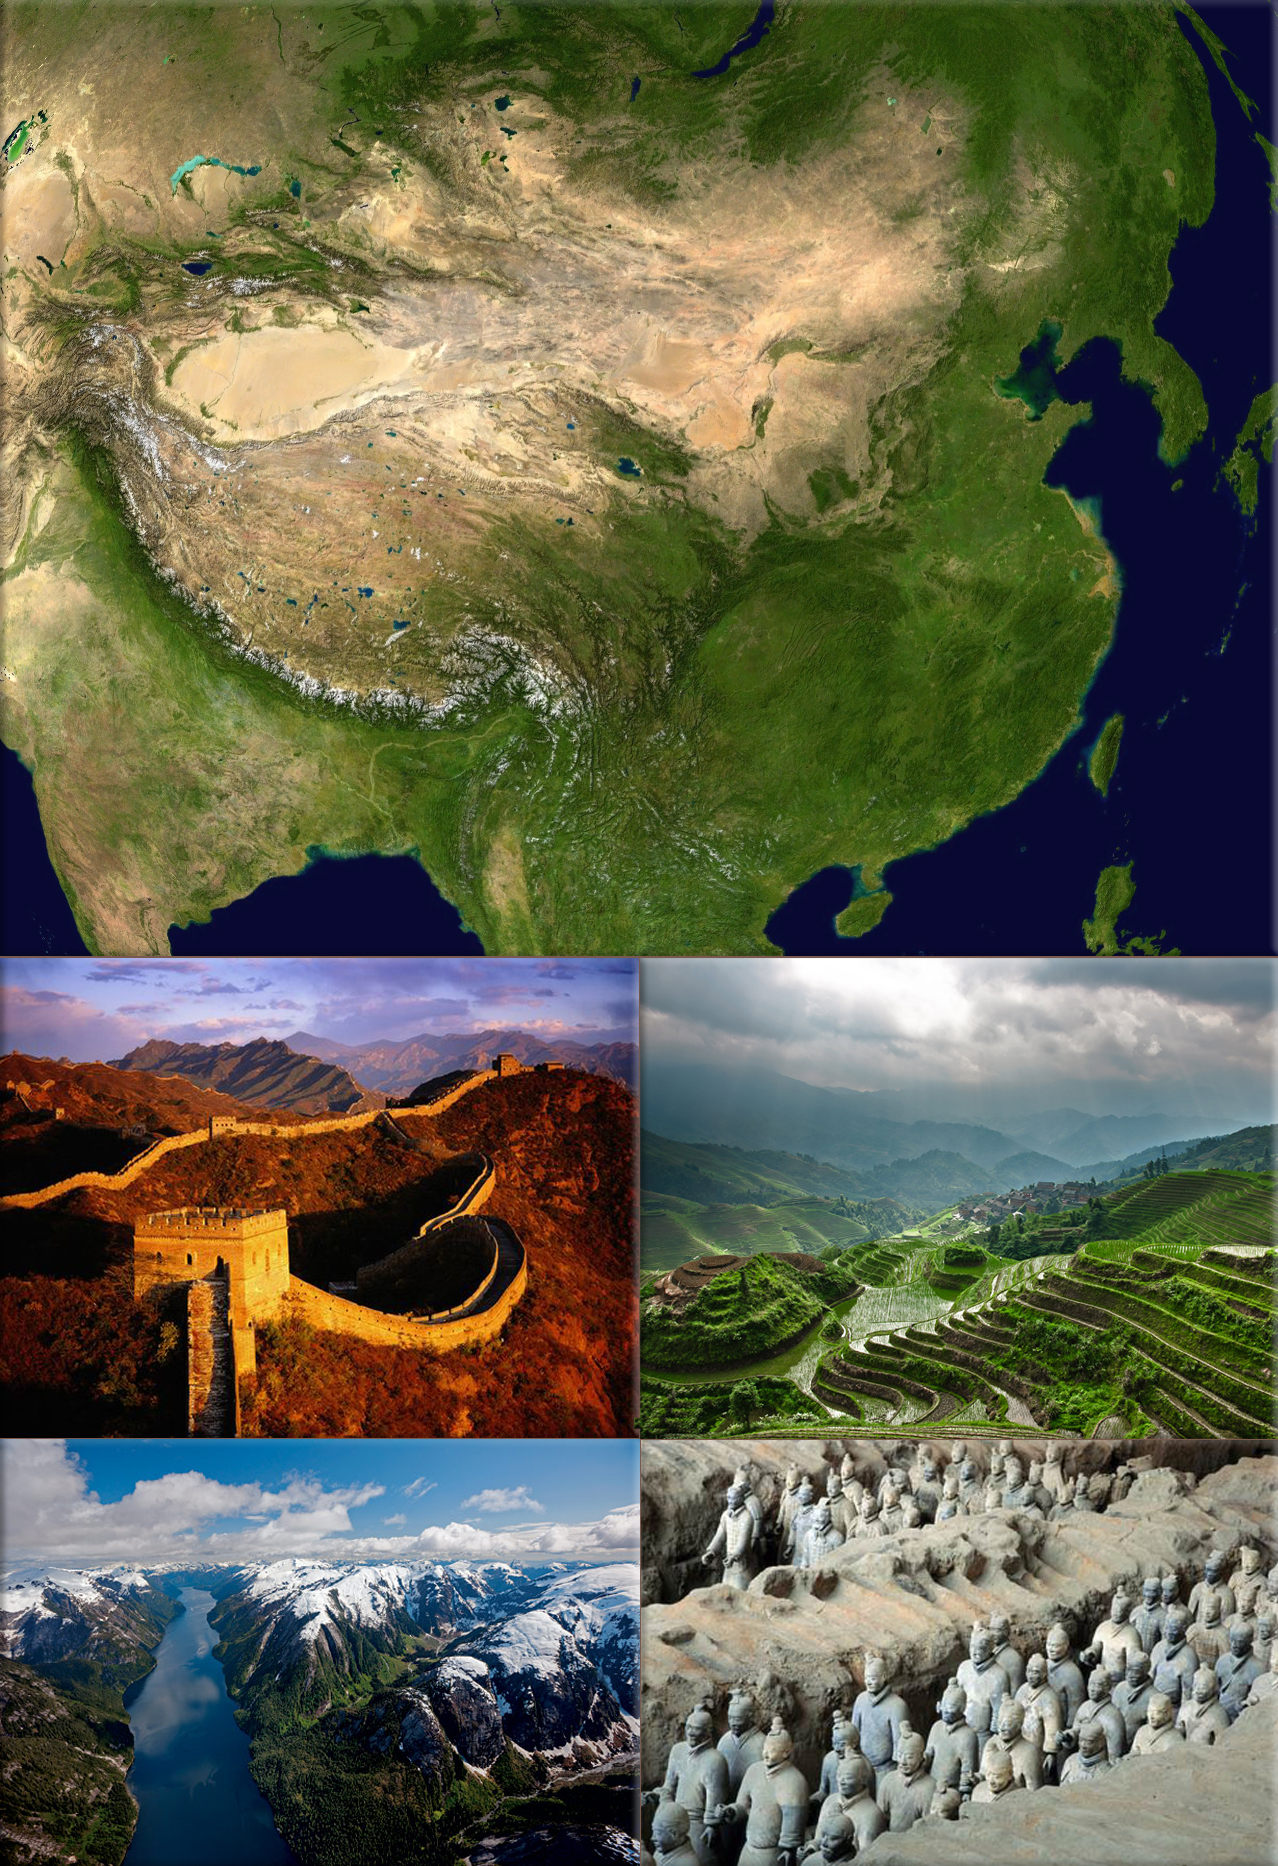 China: the world's most populous country, covering approximately 9.6 million square kilometres, second-largest country by land area (China from NASA Wordwind Satellite; Great Wall China, credit National Geographic; LongJi Terrace, credit National Geographic; Great Bear Rainforest, credit Paul Nicklen, National Geographic; Platoons of clay soldiers were buried with China's first emperor, Qin Shi Huang Di, (required a labor force of 700,000 to build), credit O. Louis Mazzatenta, National Geographic)